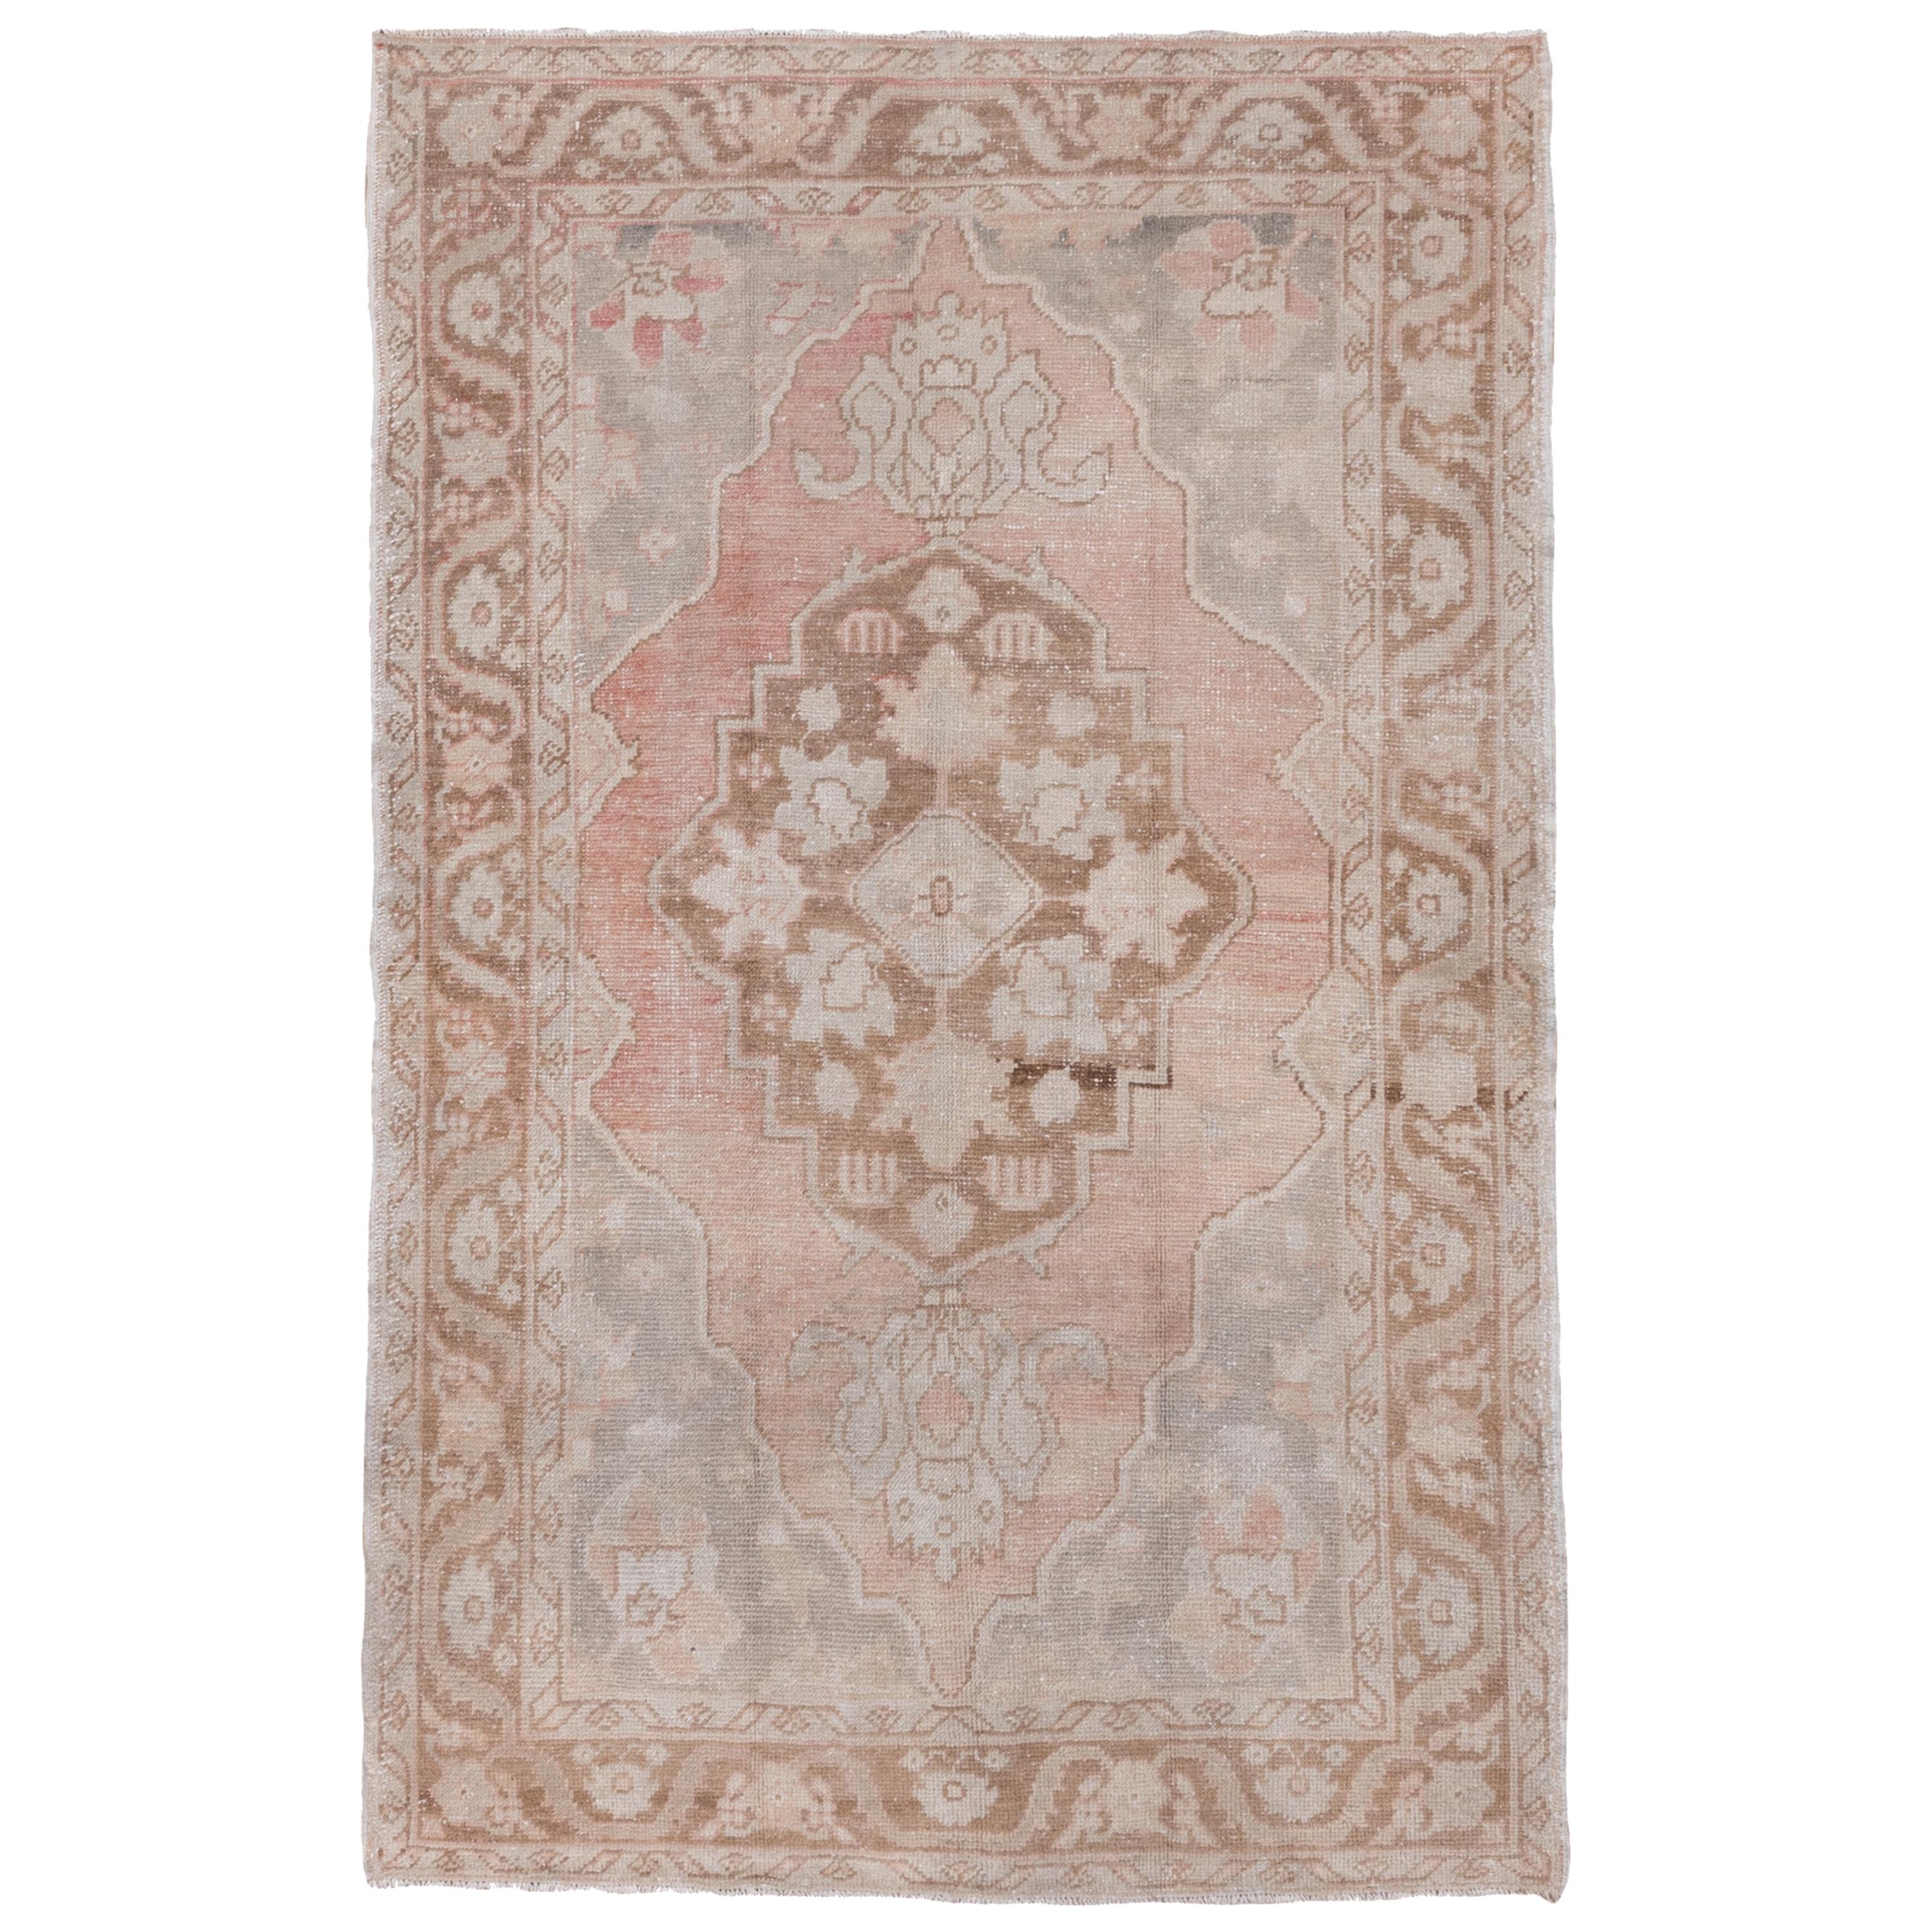 Antique Turkish Oushak Village Rug, Pink and Gray Field